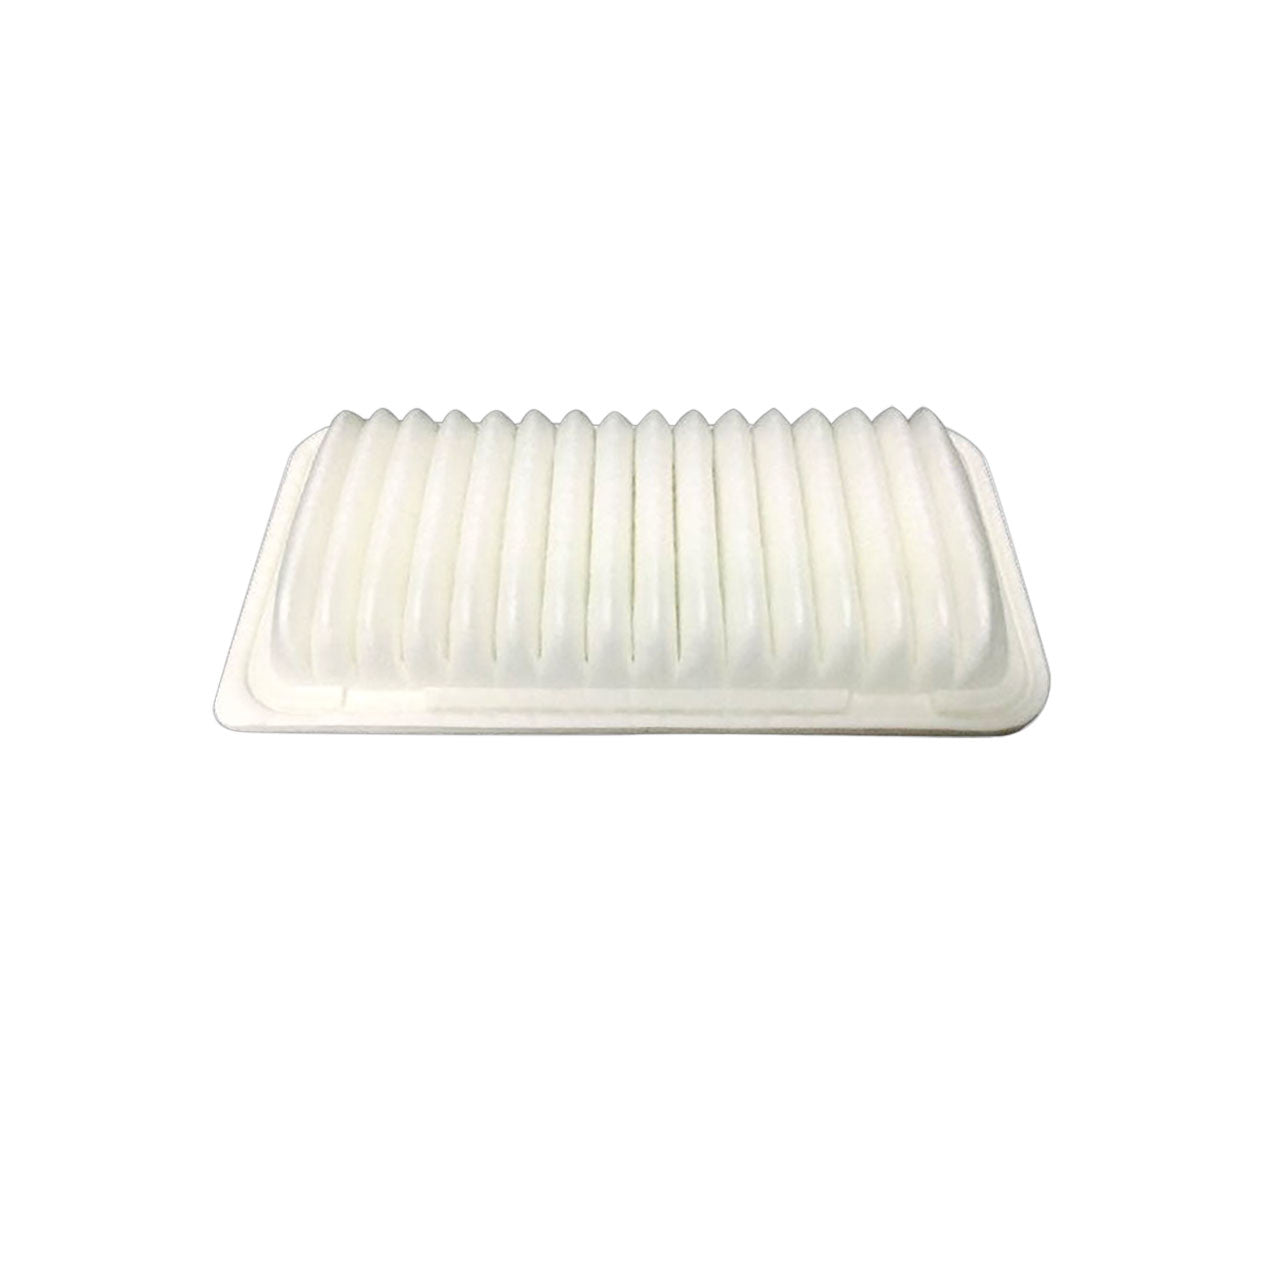 WA1113 Wesfil Air Filter for Toyota (Cross Ref: A1481)